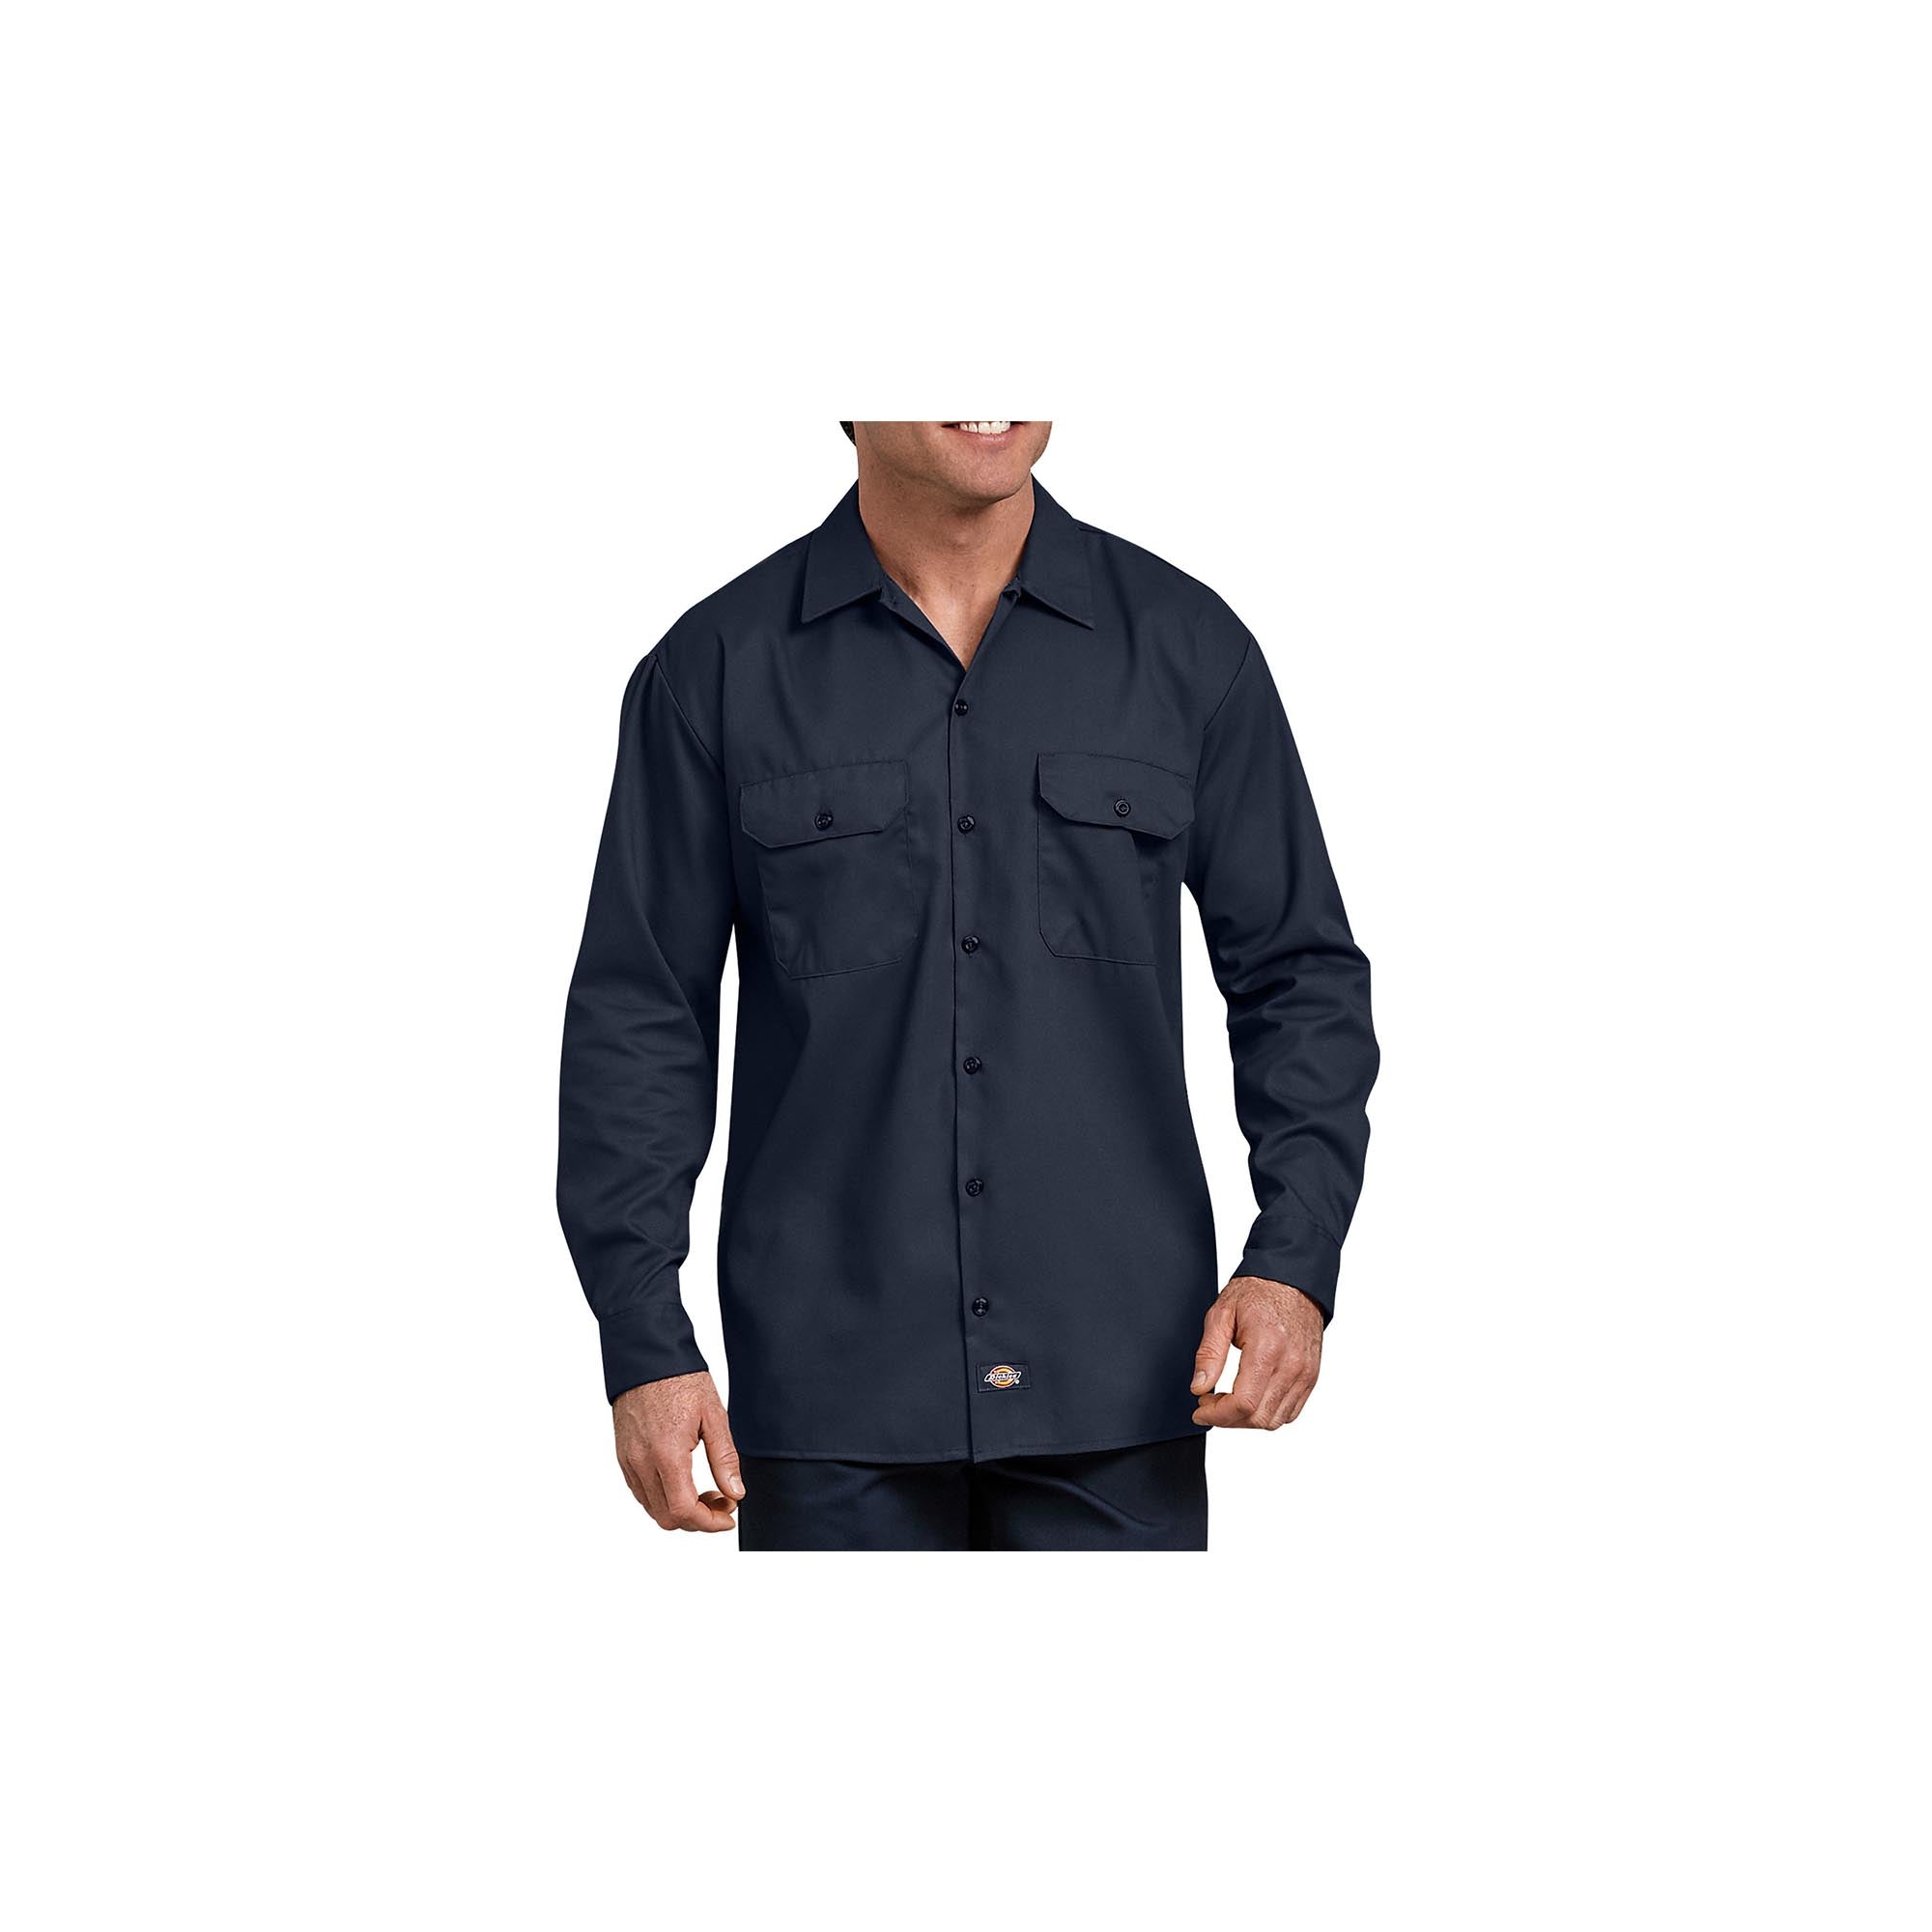 Dickies FLEX Relaxed Fit Long Sleeve Twill Work Shirt Charcoal